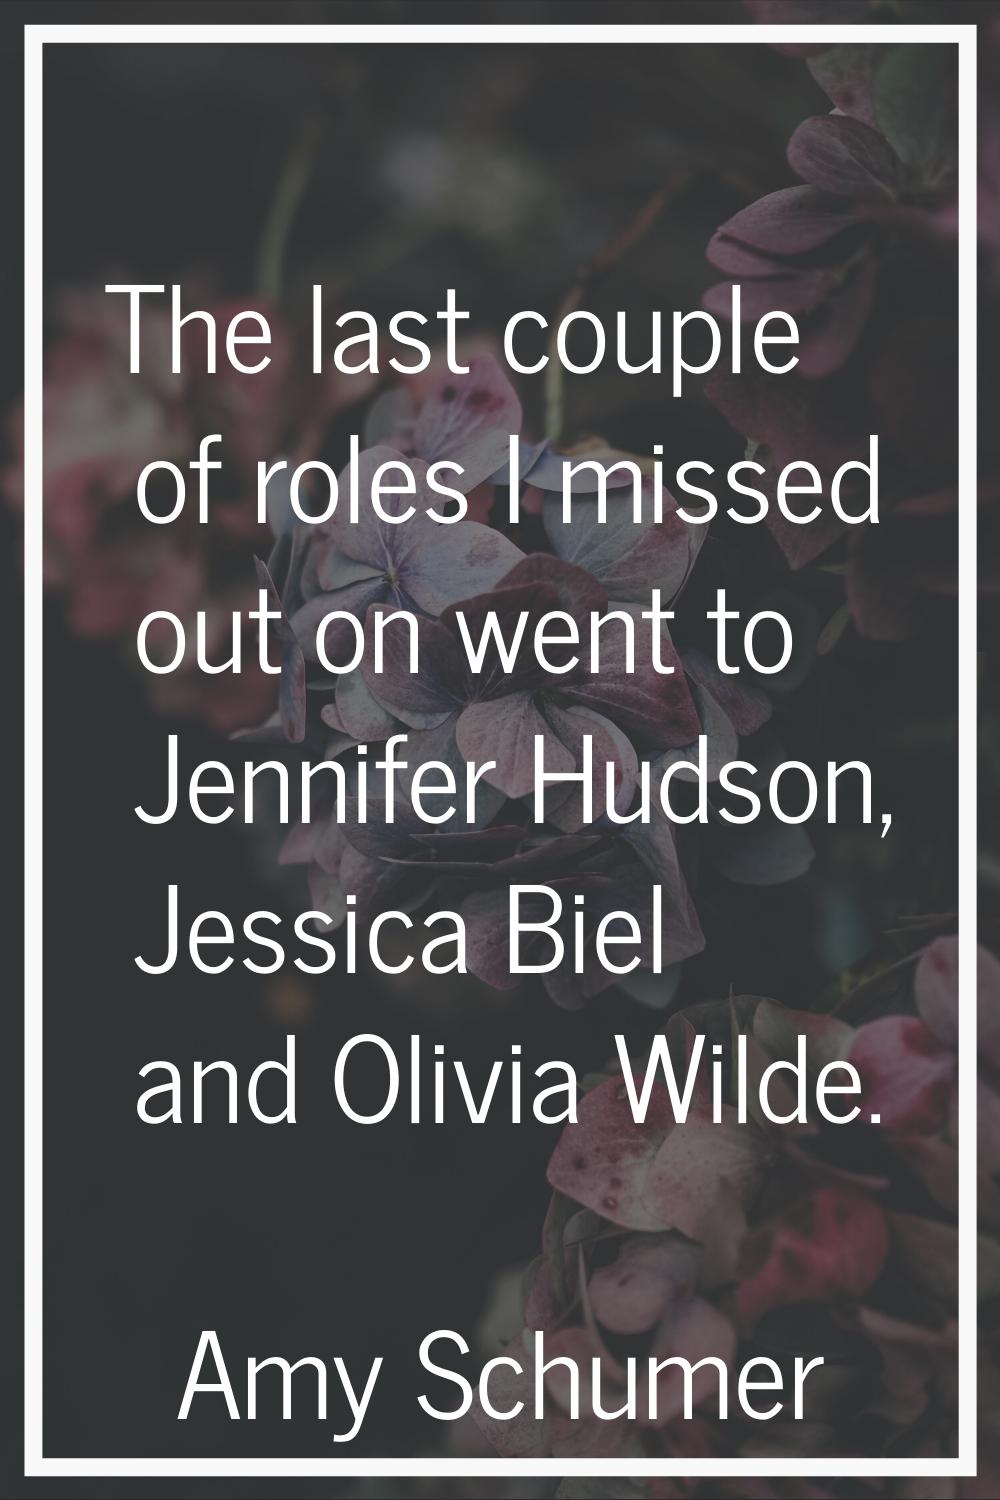 The last couple of roles I missed out on went to Jennifer Hudson, Jessica Biel and Olivia Wilde.